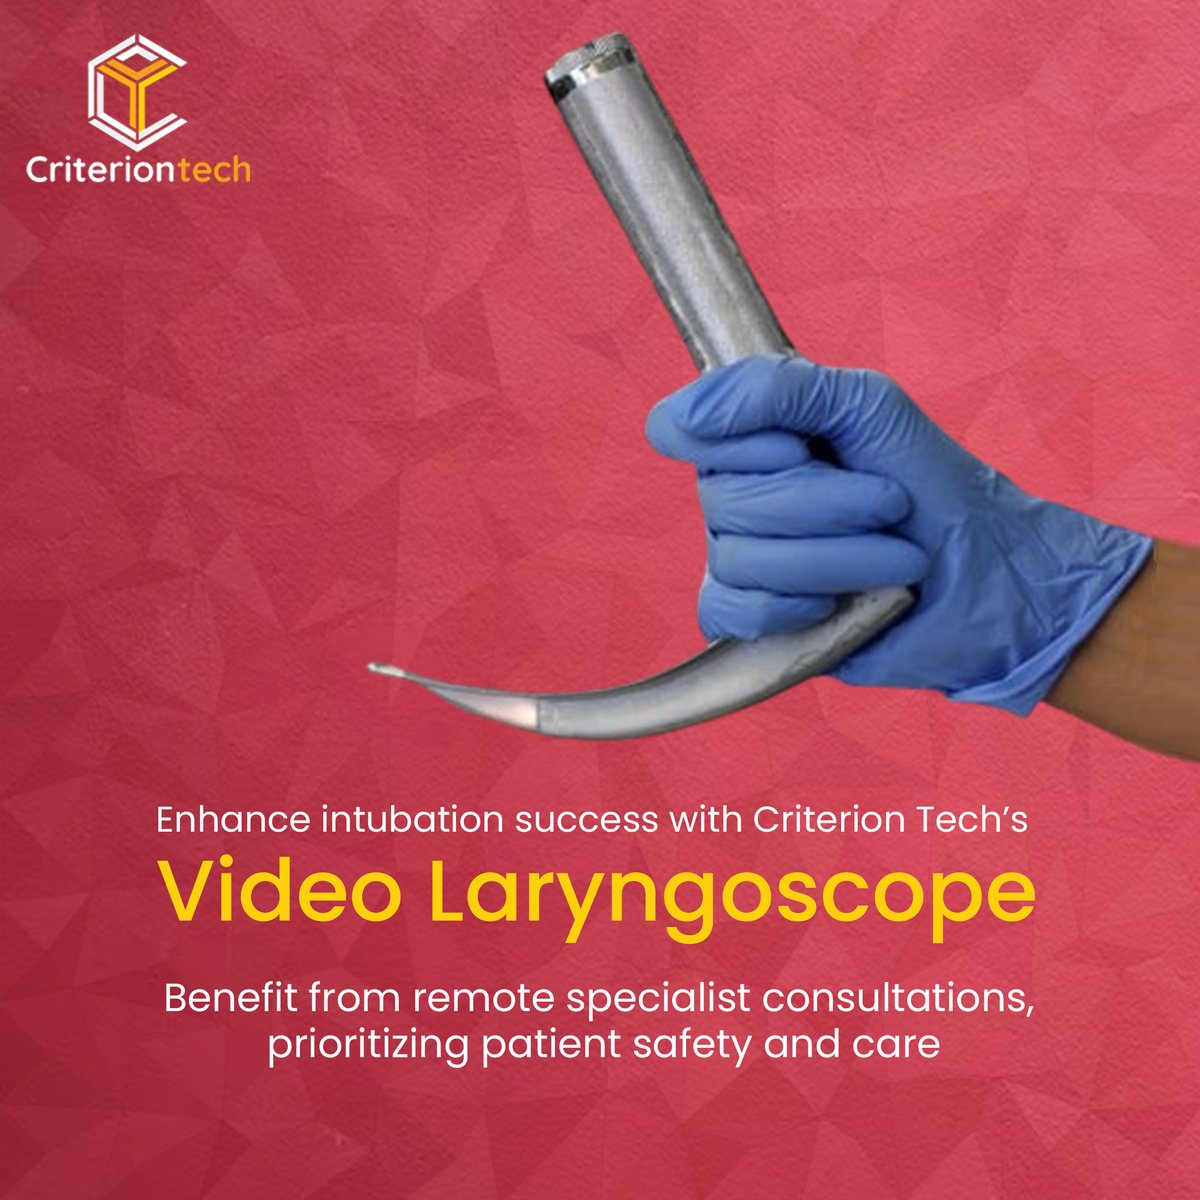 Our Video Laryngoscope ensures precision and patient safety. 🌐🏥

Learn more at: criteriontechnologies.com/video-laryngos…
.
#MedicalInnovation #PatientSafety #RemoteConsultation #PatientSafety #HealthcareInnovation #LaryngoscopeAdvantage #Criteria4Technology #CriterionTech